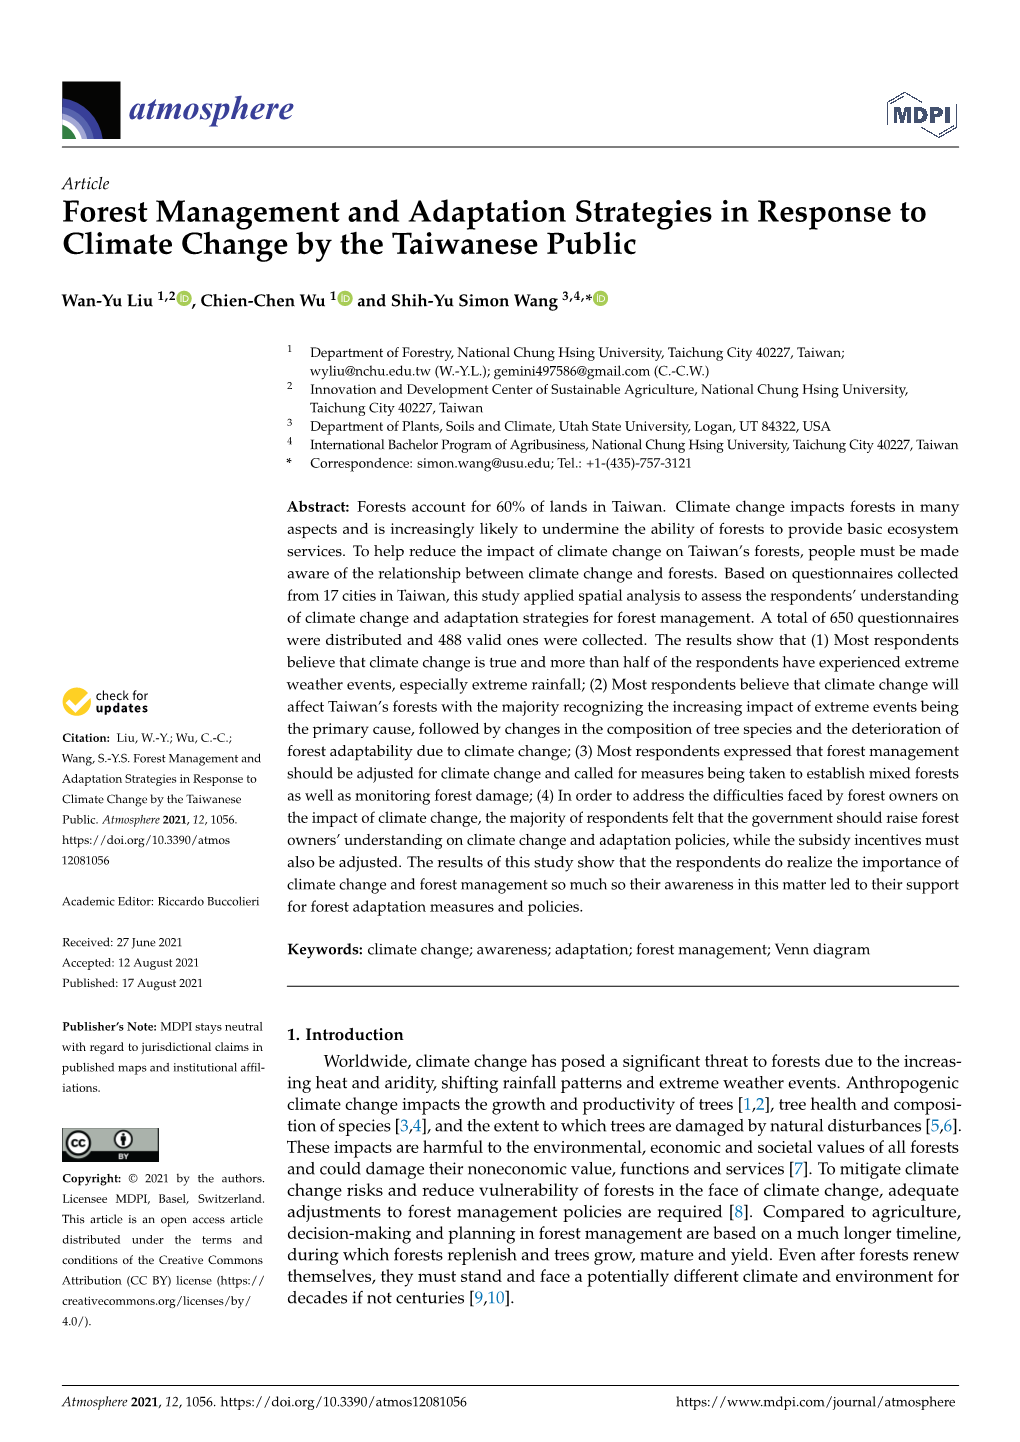 Forest Management and Adaptation Strategies in Response to Climate Change by the Taiwanese Public